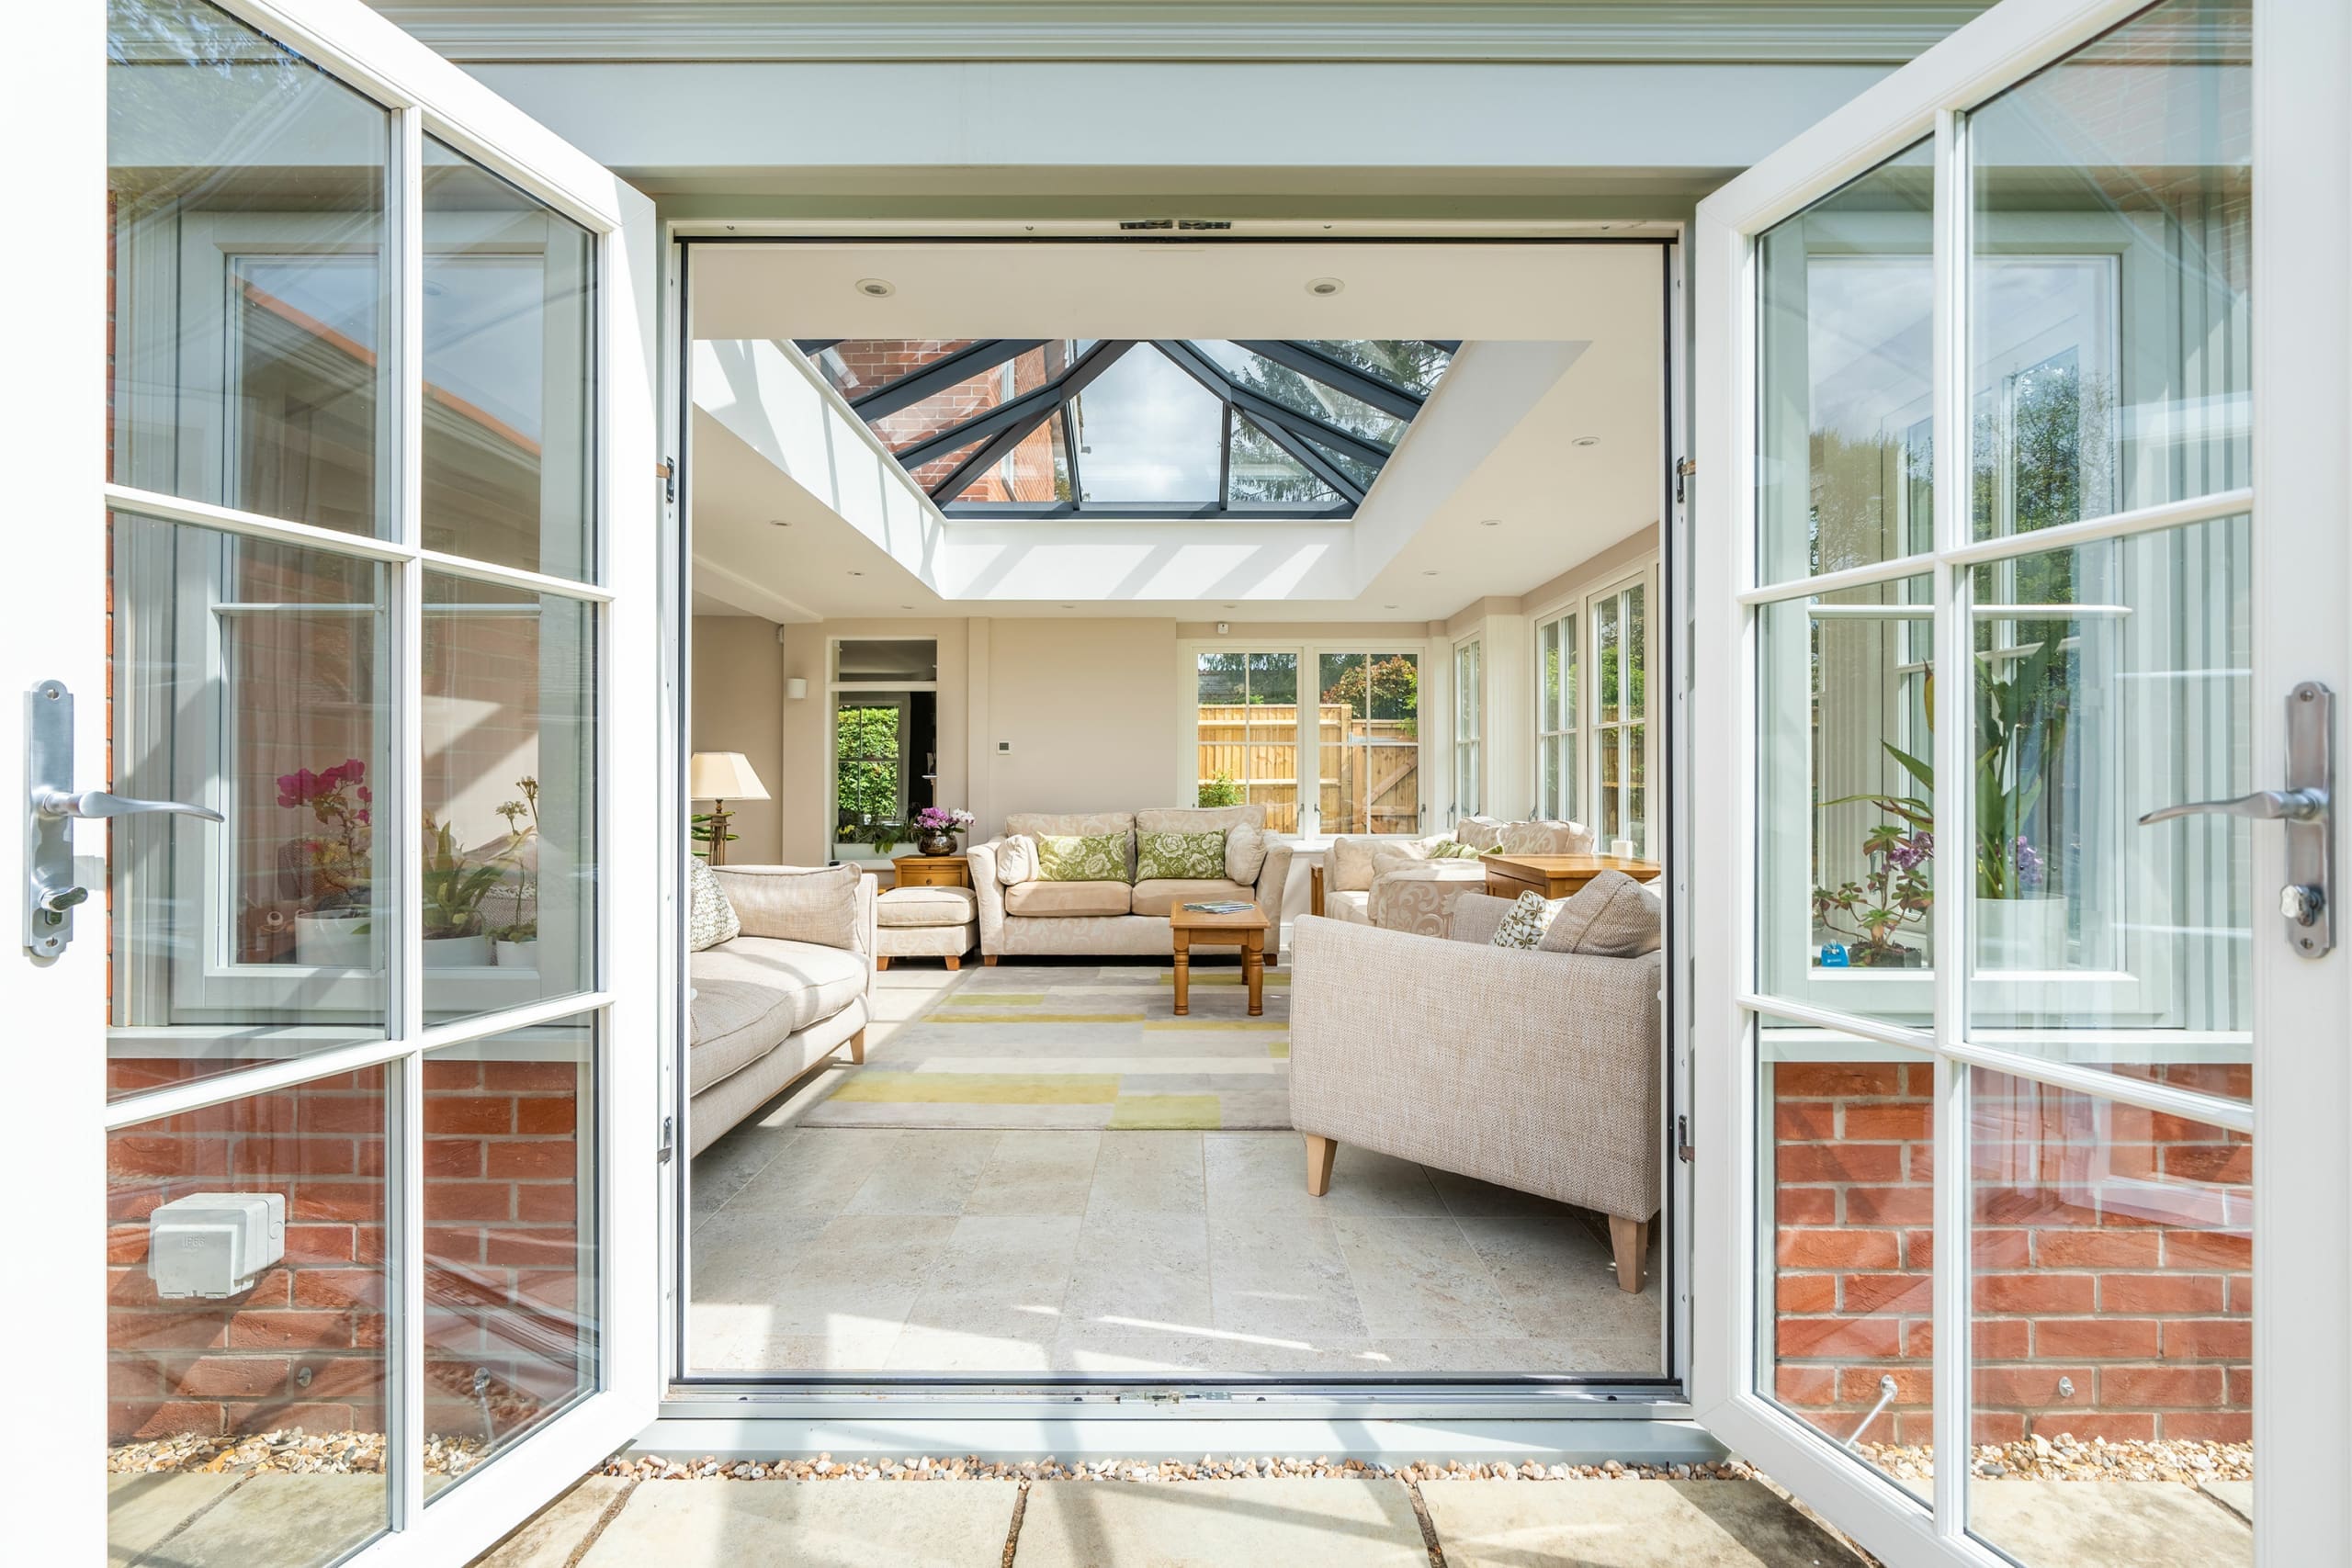 View from the french doors into living room area with comfy sofas, armchairs and oak furnishings, roof lantern and dual aspect windows.